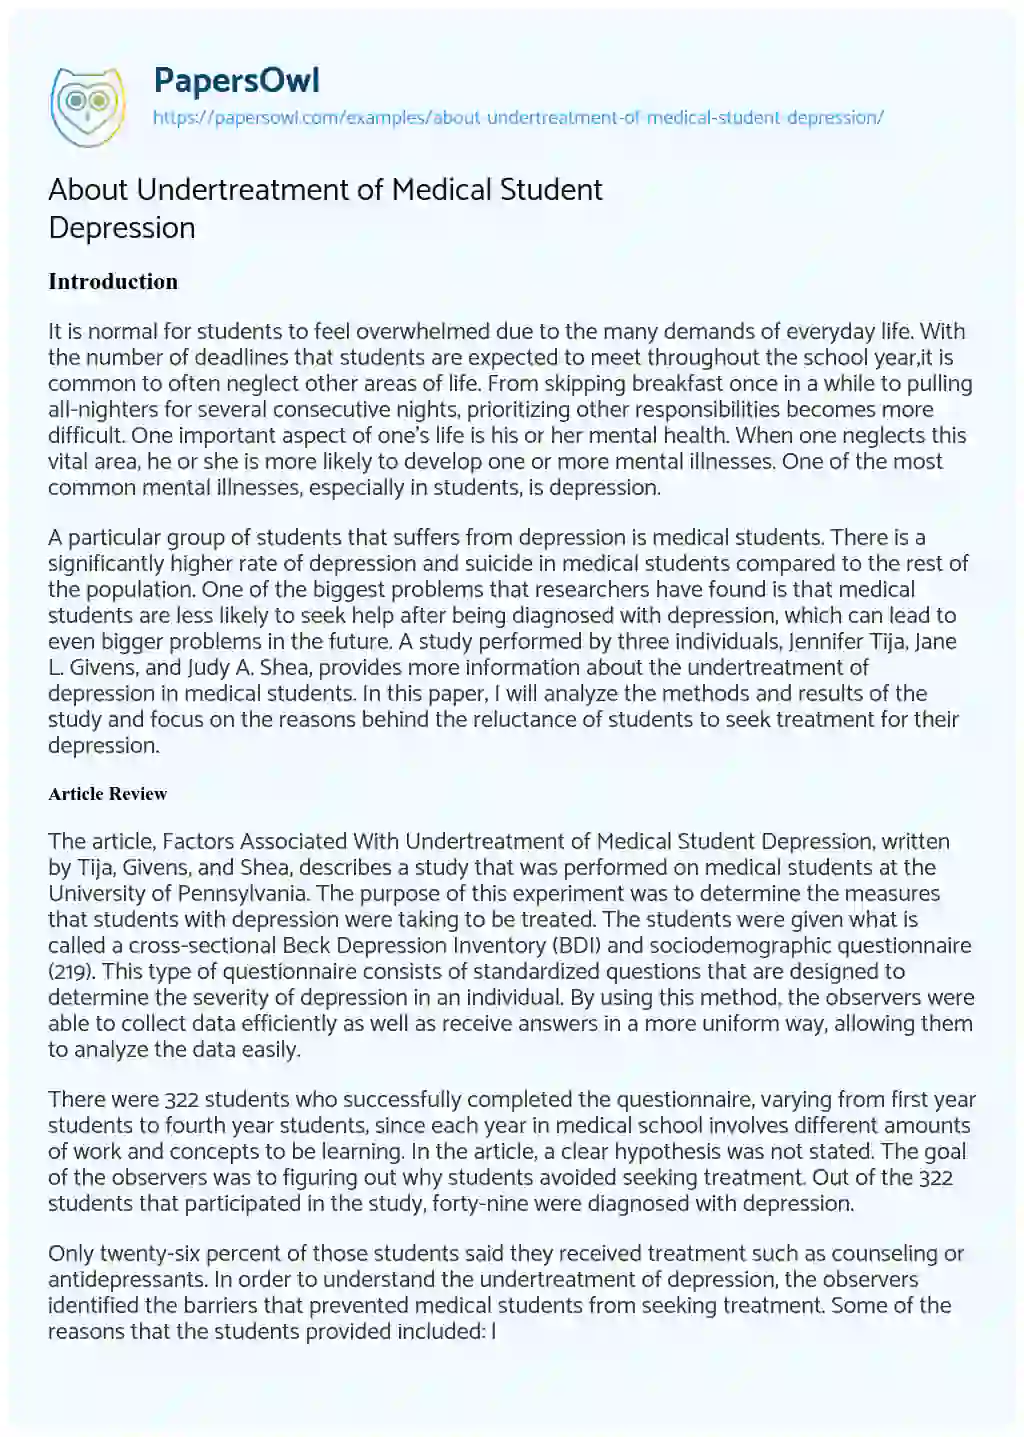 About Undertreatment of Medical Student Depression essay